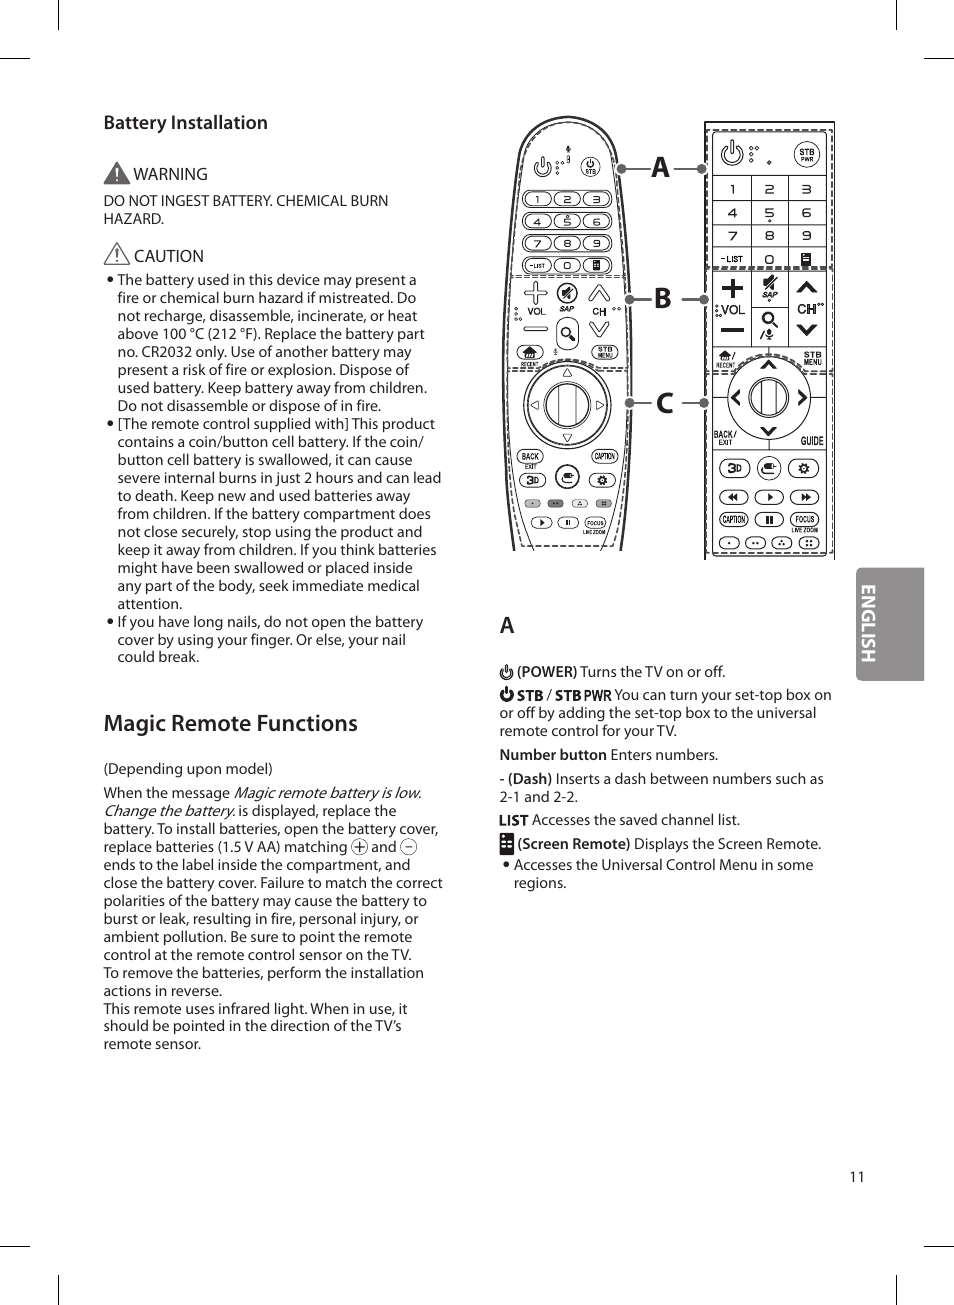 Bc a, Magic remote functions, English battery installation | LG OLED65G6P User Manual | Page 11 / 50